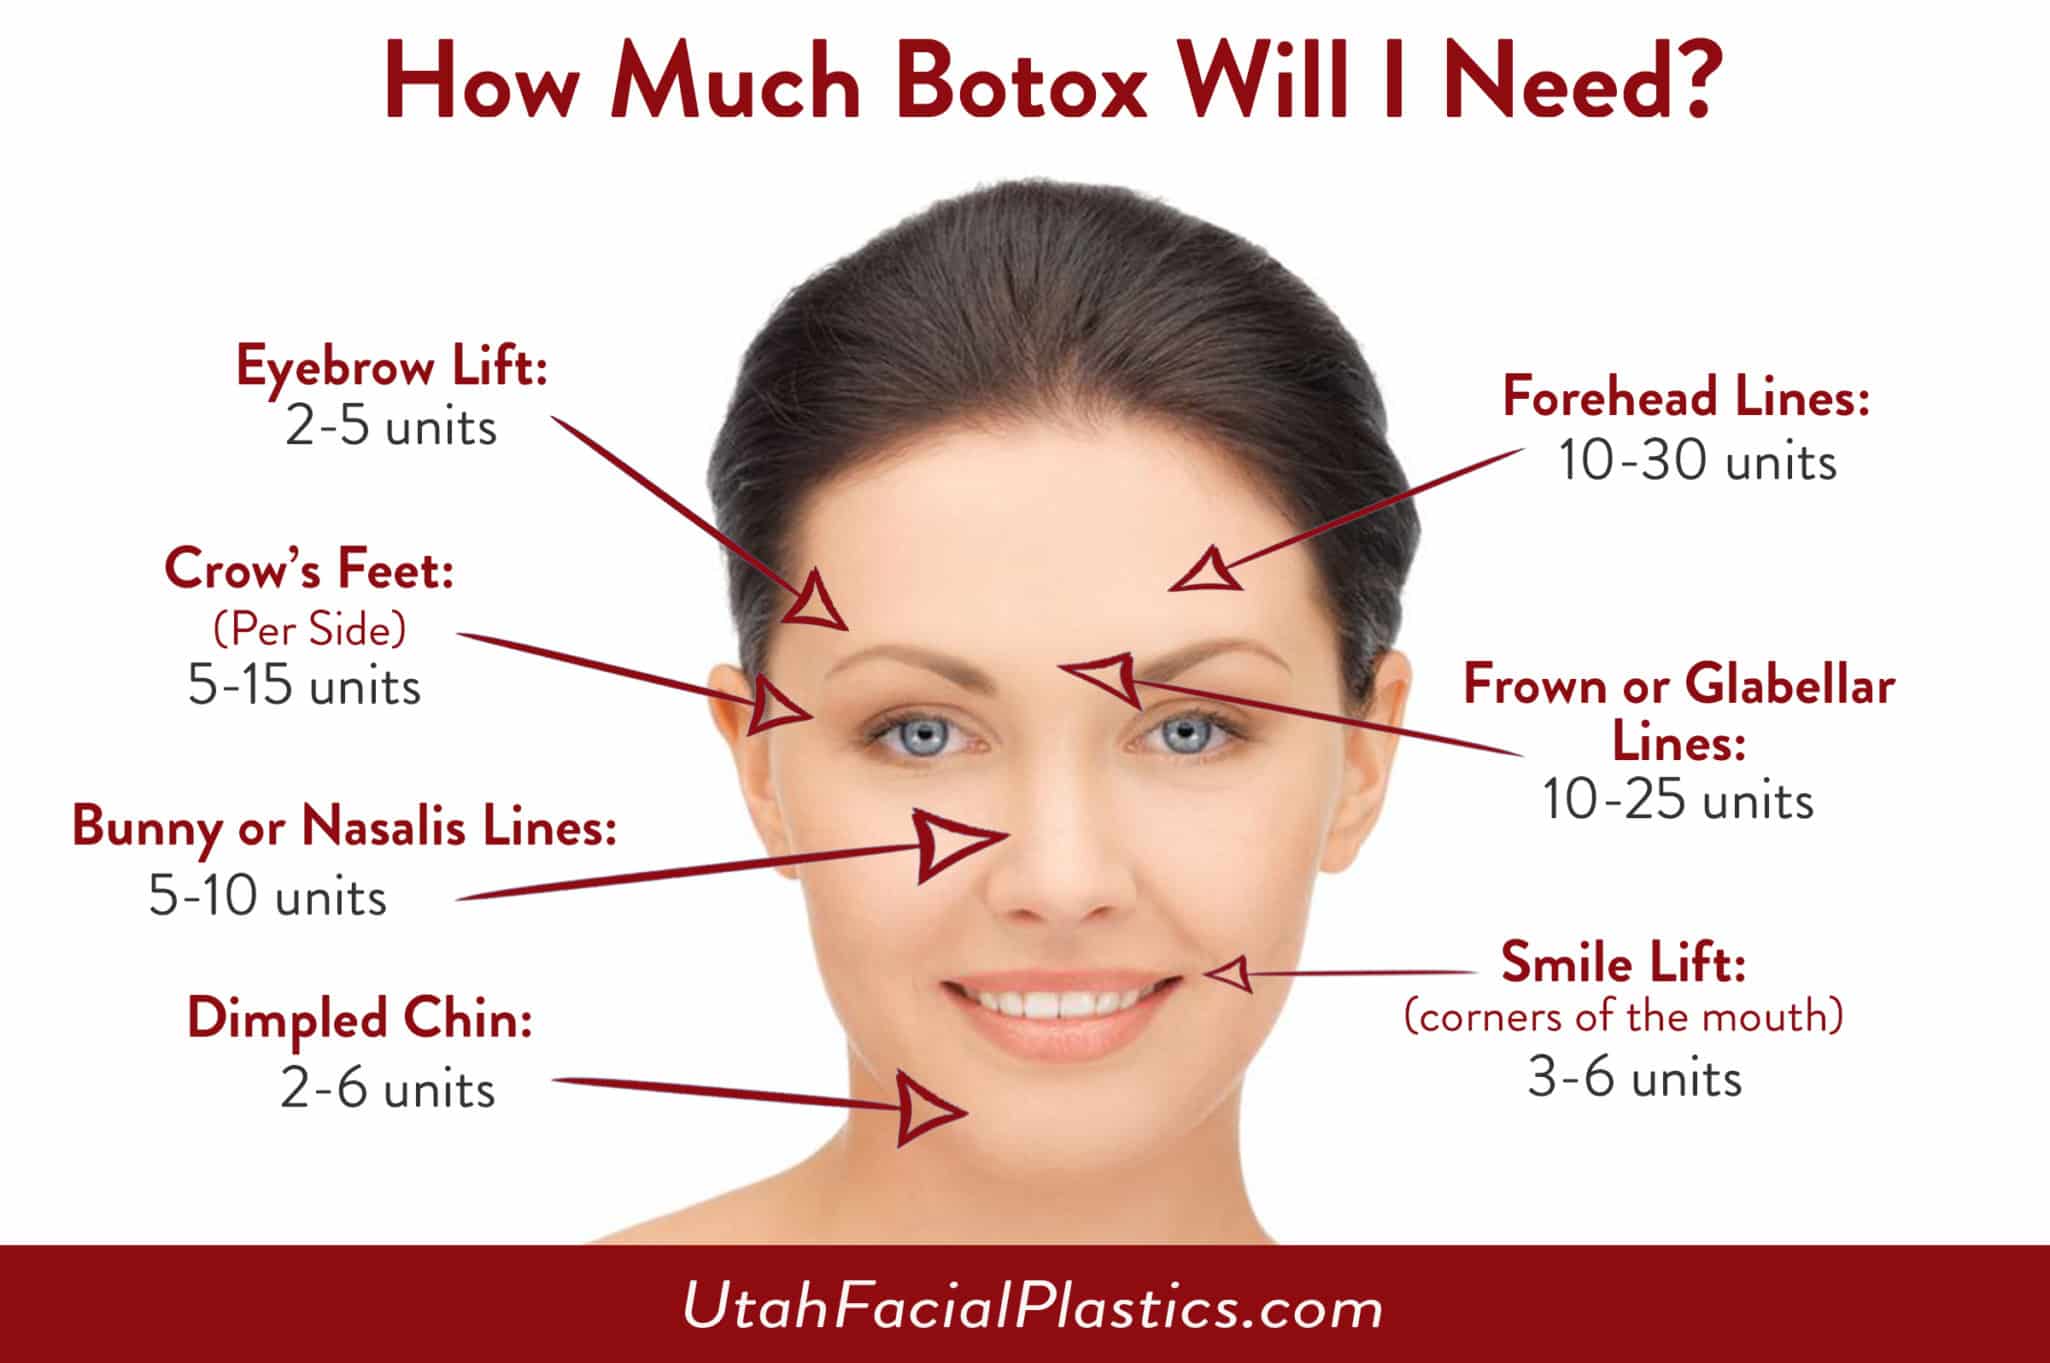 How much botox will i need